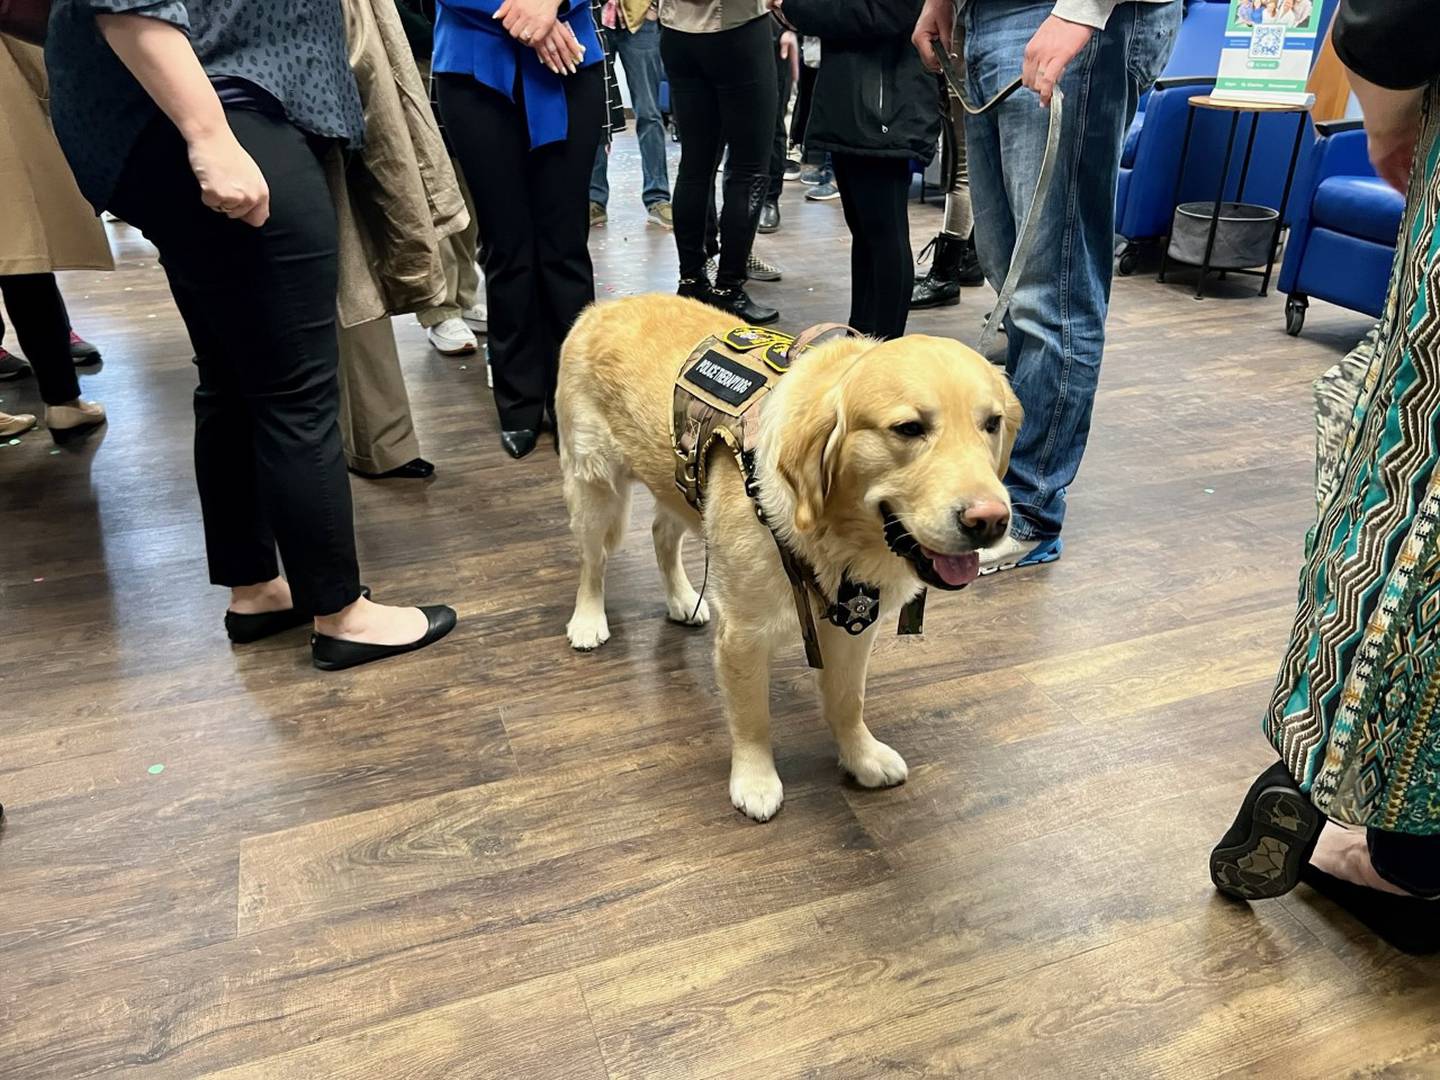 Comfort dog Chance attends the ribbon cutting and grand opening of Ecker Center’s new Crisis Stabilization Program Tuesday. Chance is part of the Collaborative Crisis Services Unit at the Elgin Police Department in partnership with Ecker Center.